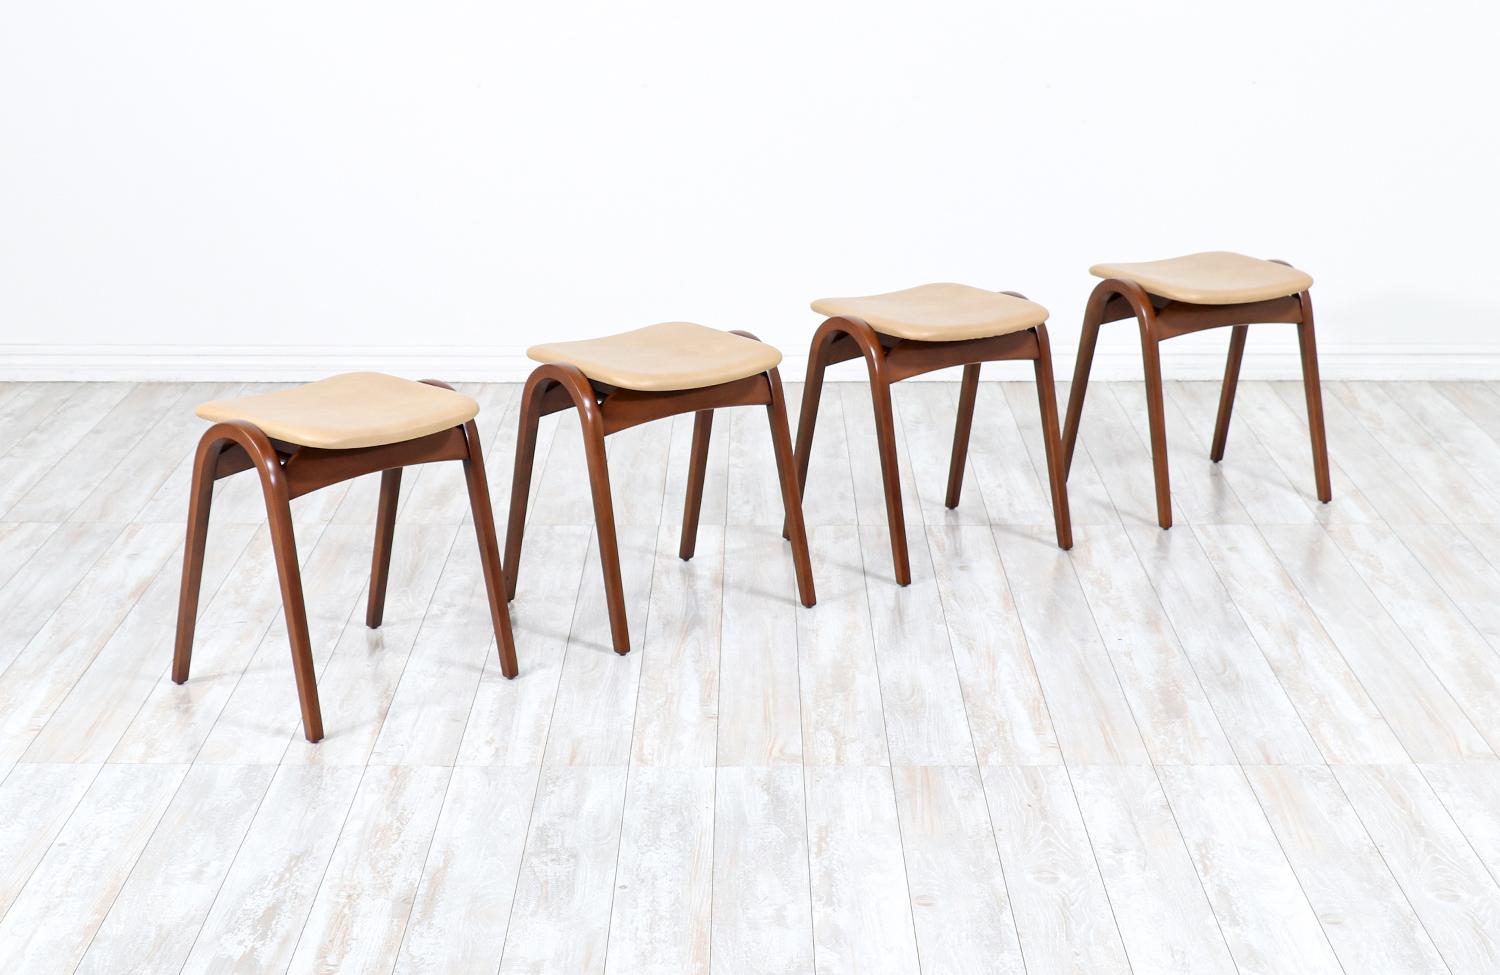 Isamu Kenmochi staking stools for Akita Mokko.

________________________________________

Transforming a piece of Mid-Century Modern furniture is like bringing history back to life, and we take this journey with passion and precision. With over 17